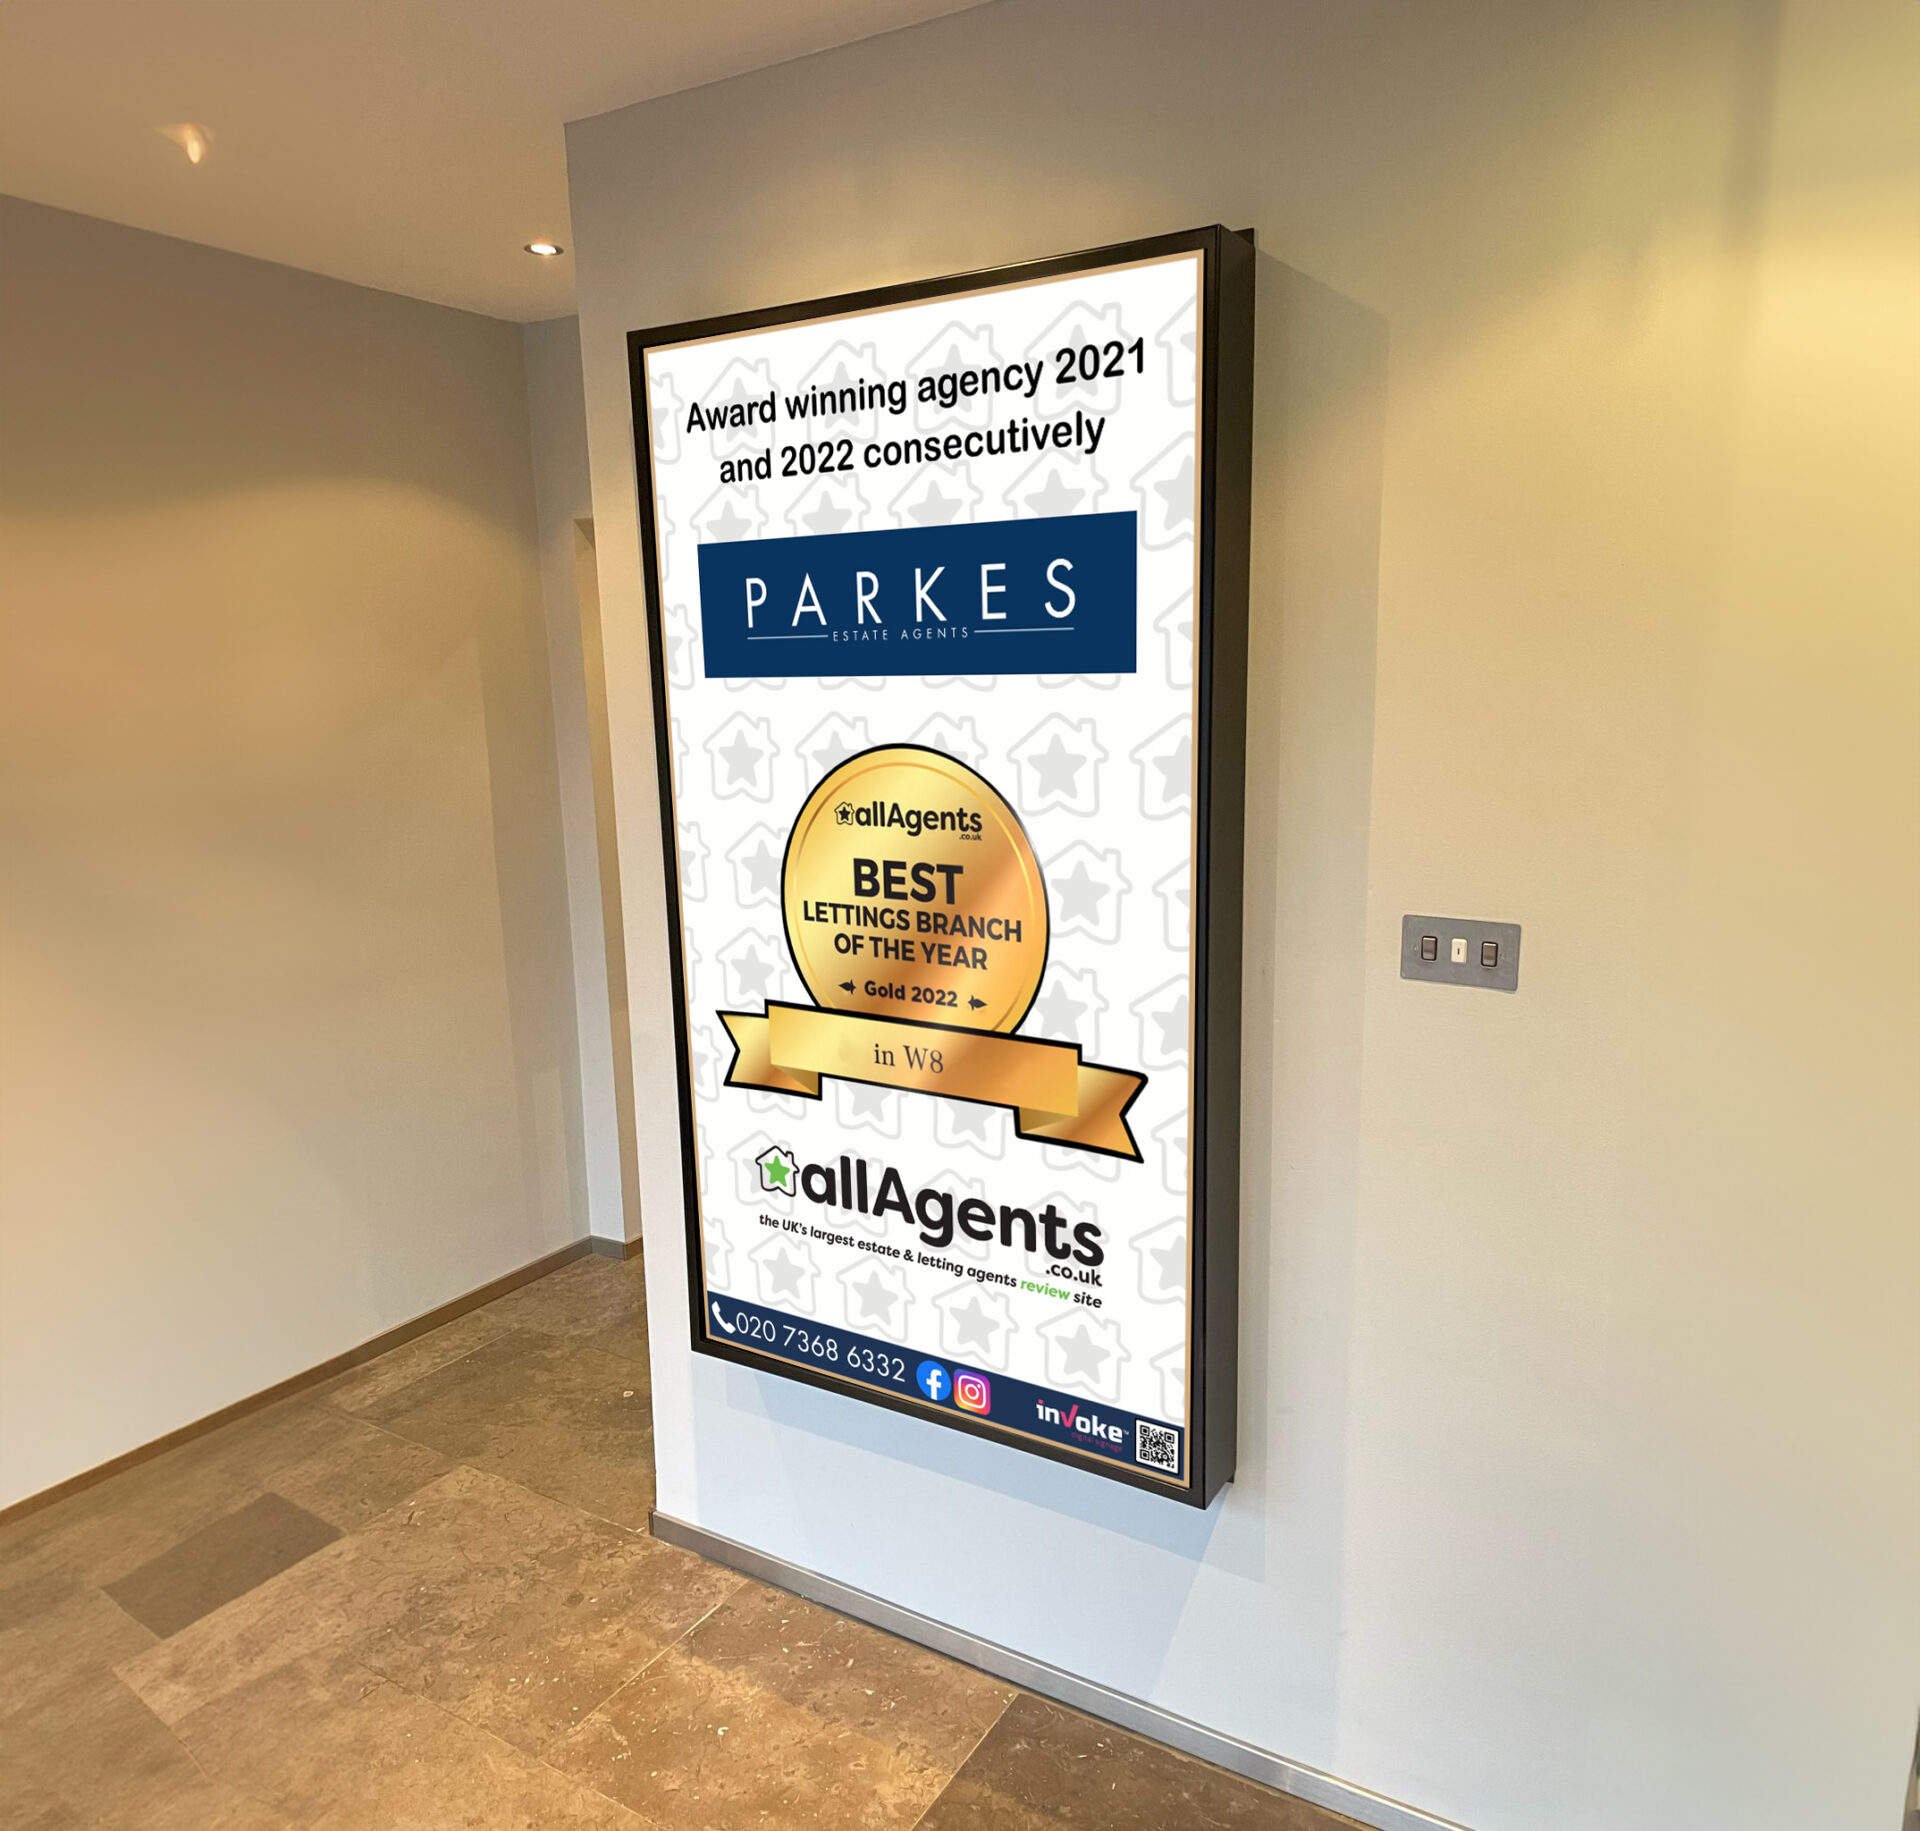 parkes estate agents internal screen showcasing that they are award winning